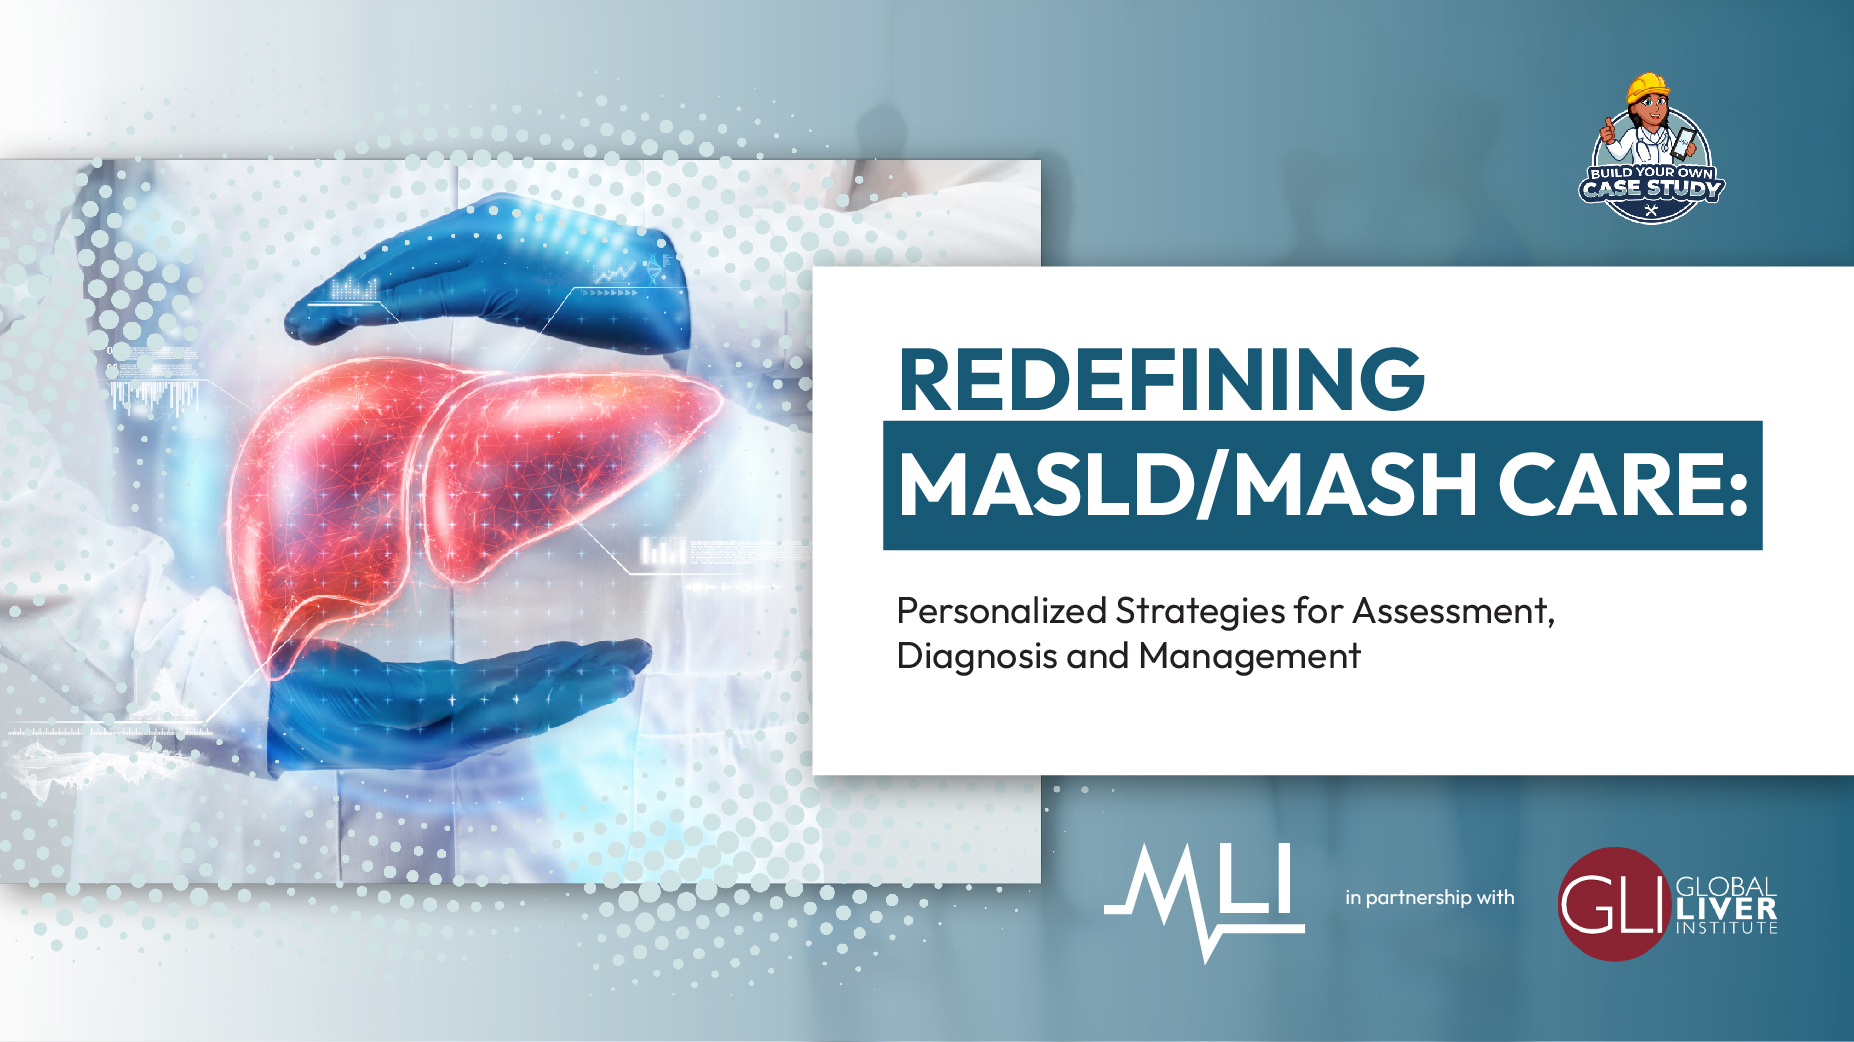 Build Your Own Case Study | Redefining MASLD/MASH Care: Personalized Strategies for Assessment, Diagnosis and Management